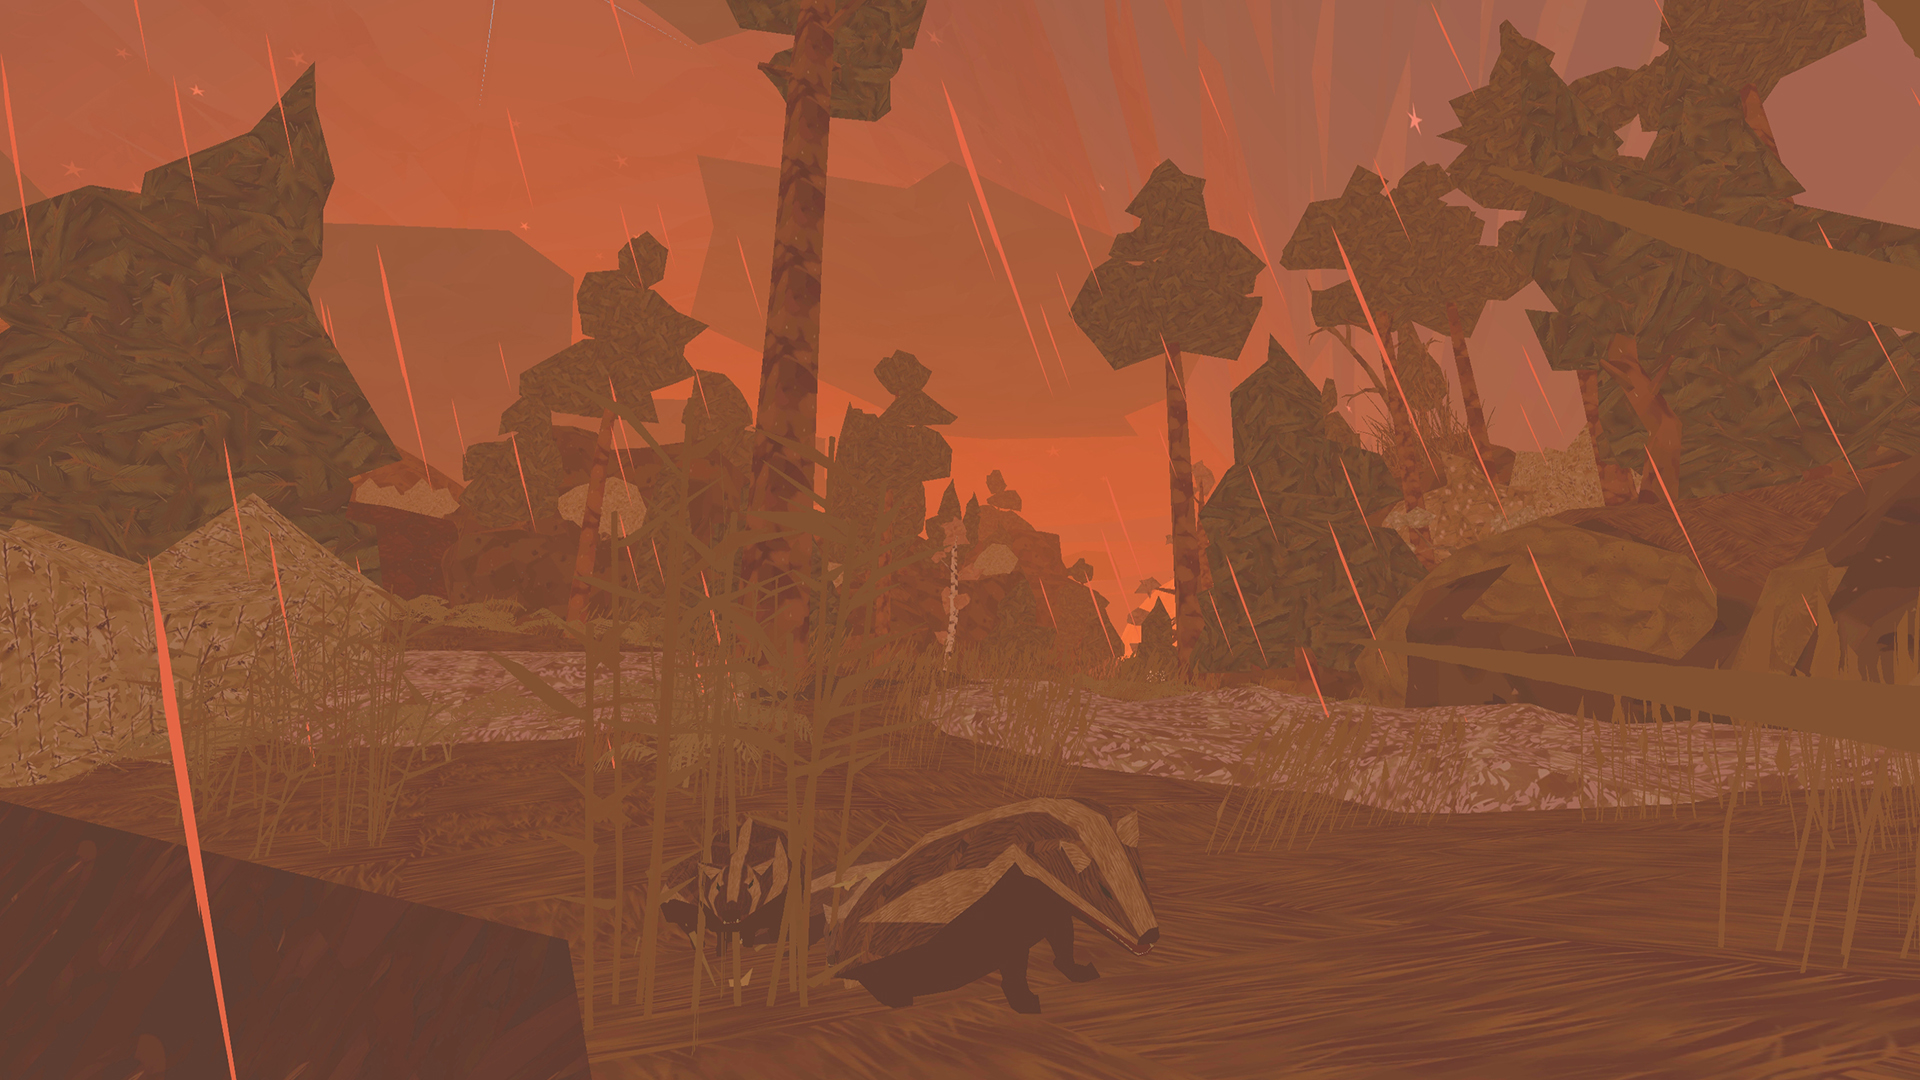 Shelter: An Animal Adventure - Android game screenshots.